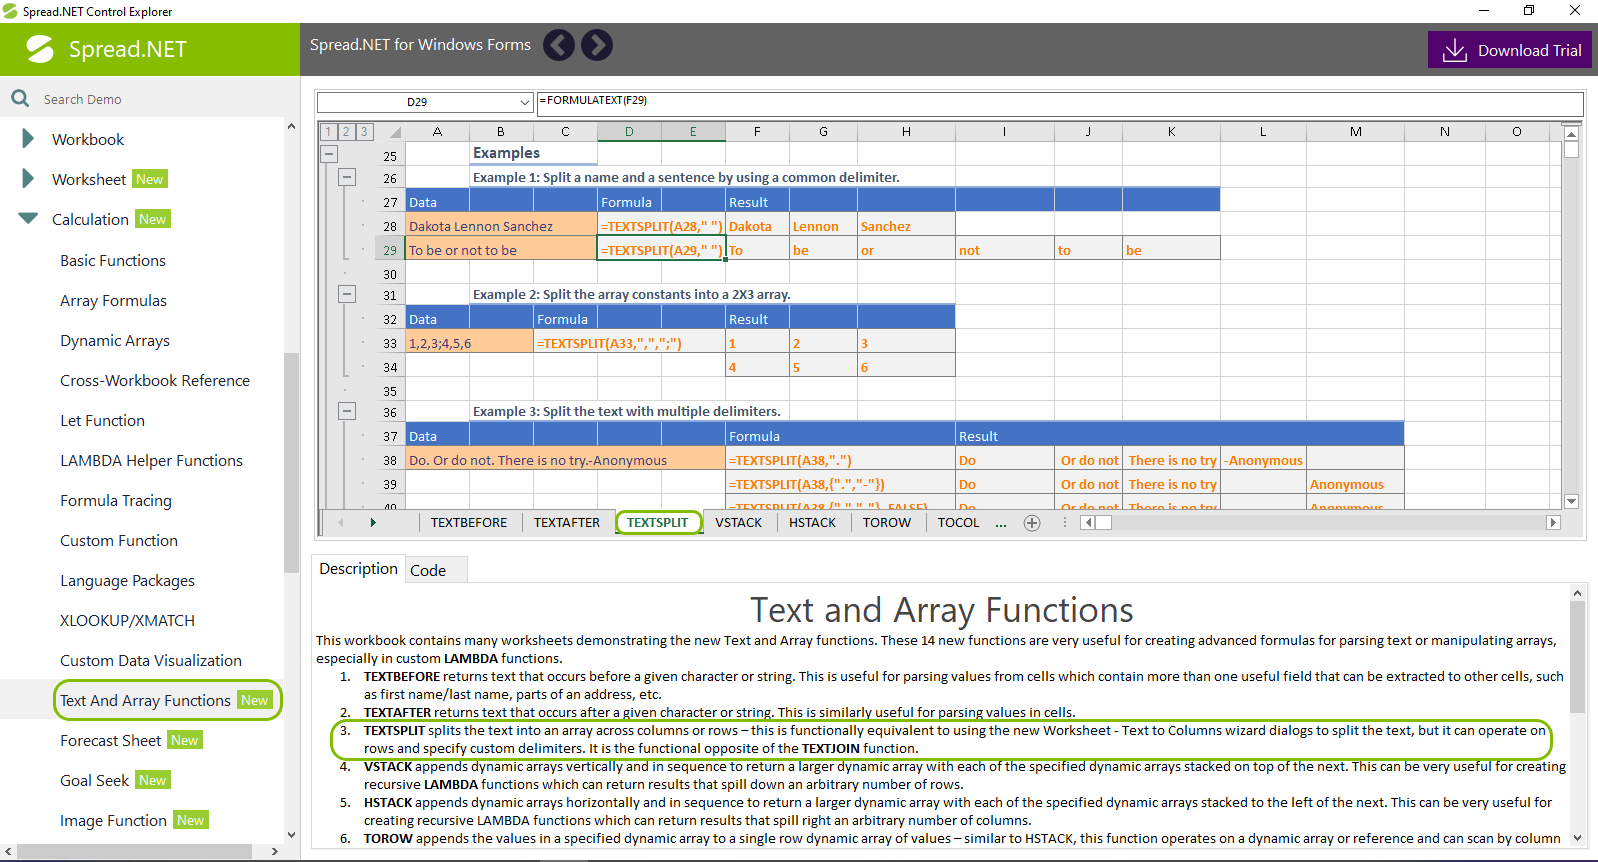 Check out the Spread.NET Demo Explorer to learn more about the TEXTSPLIT Function.